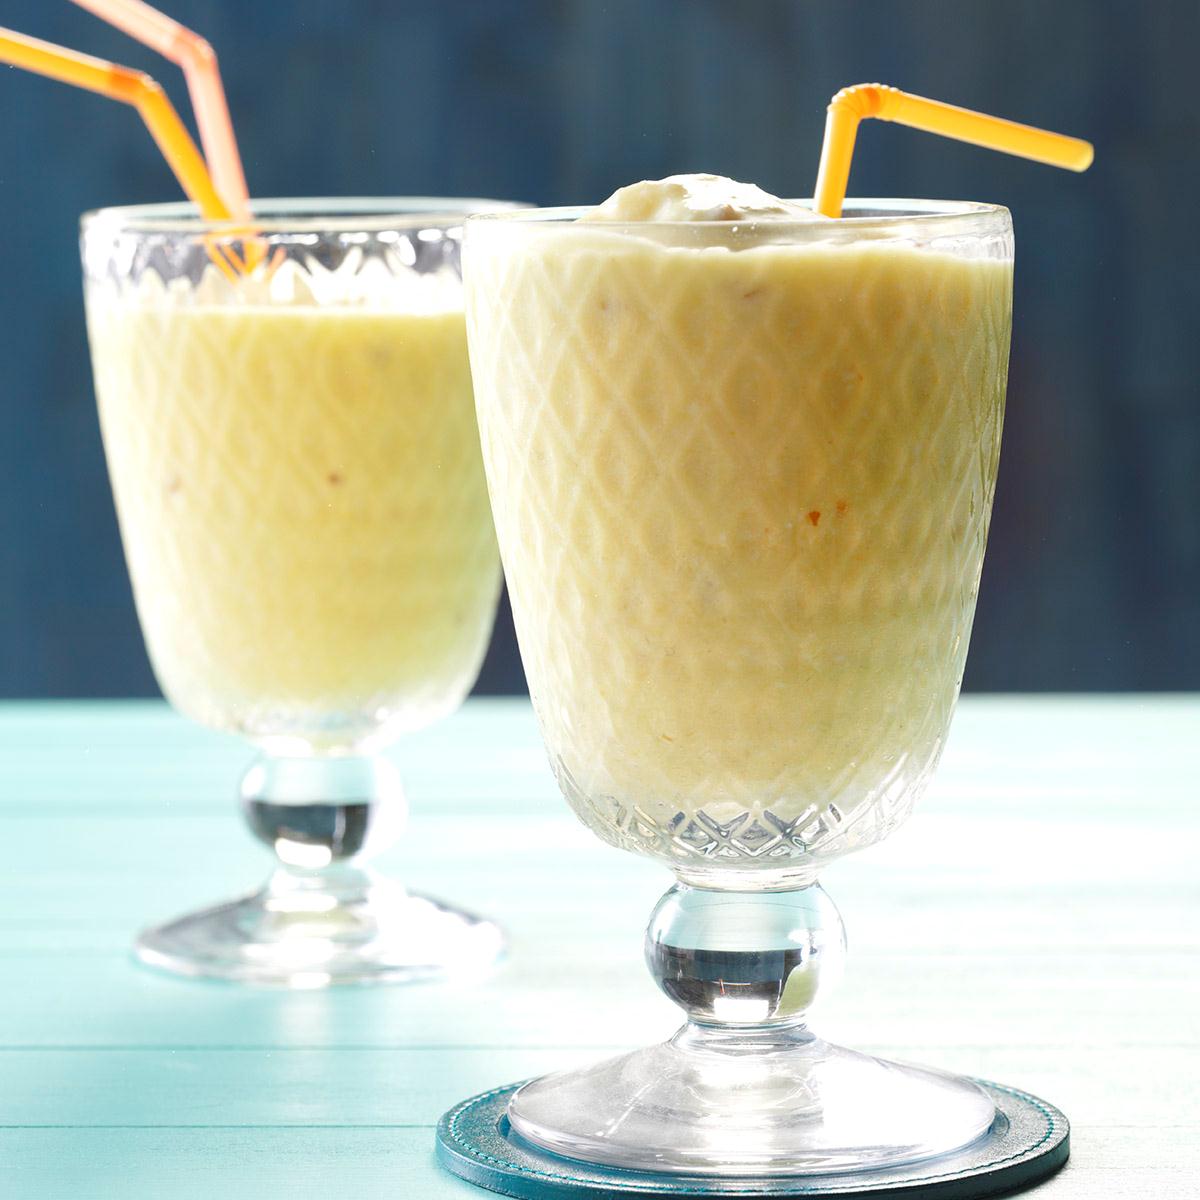 Pineapple-Coconut Smoothie Recipe: How to Make It